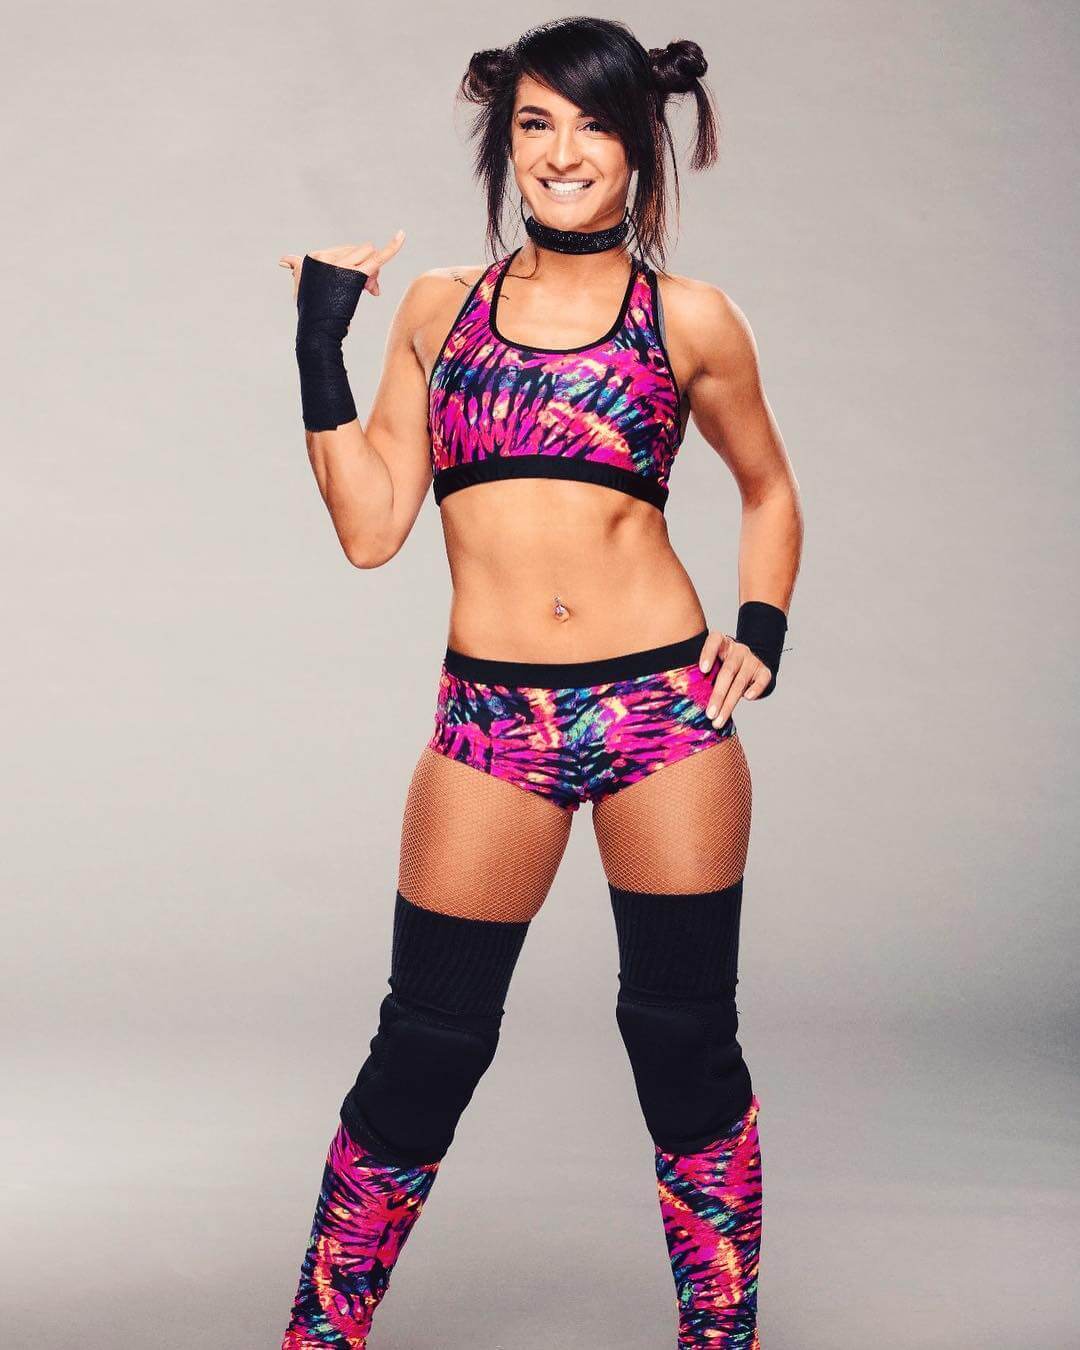 Hot Picture Of Dakota Kai Which Will Make You Want To Jump